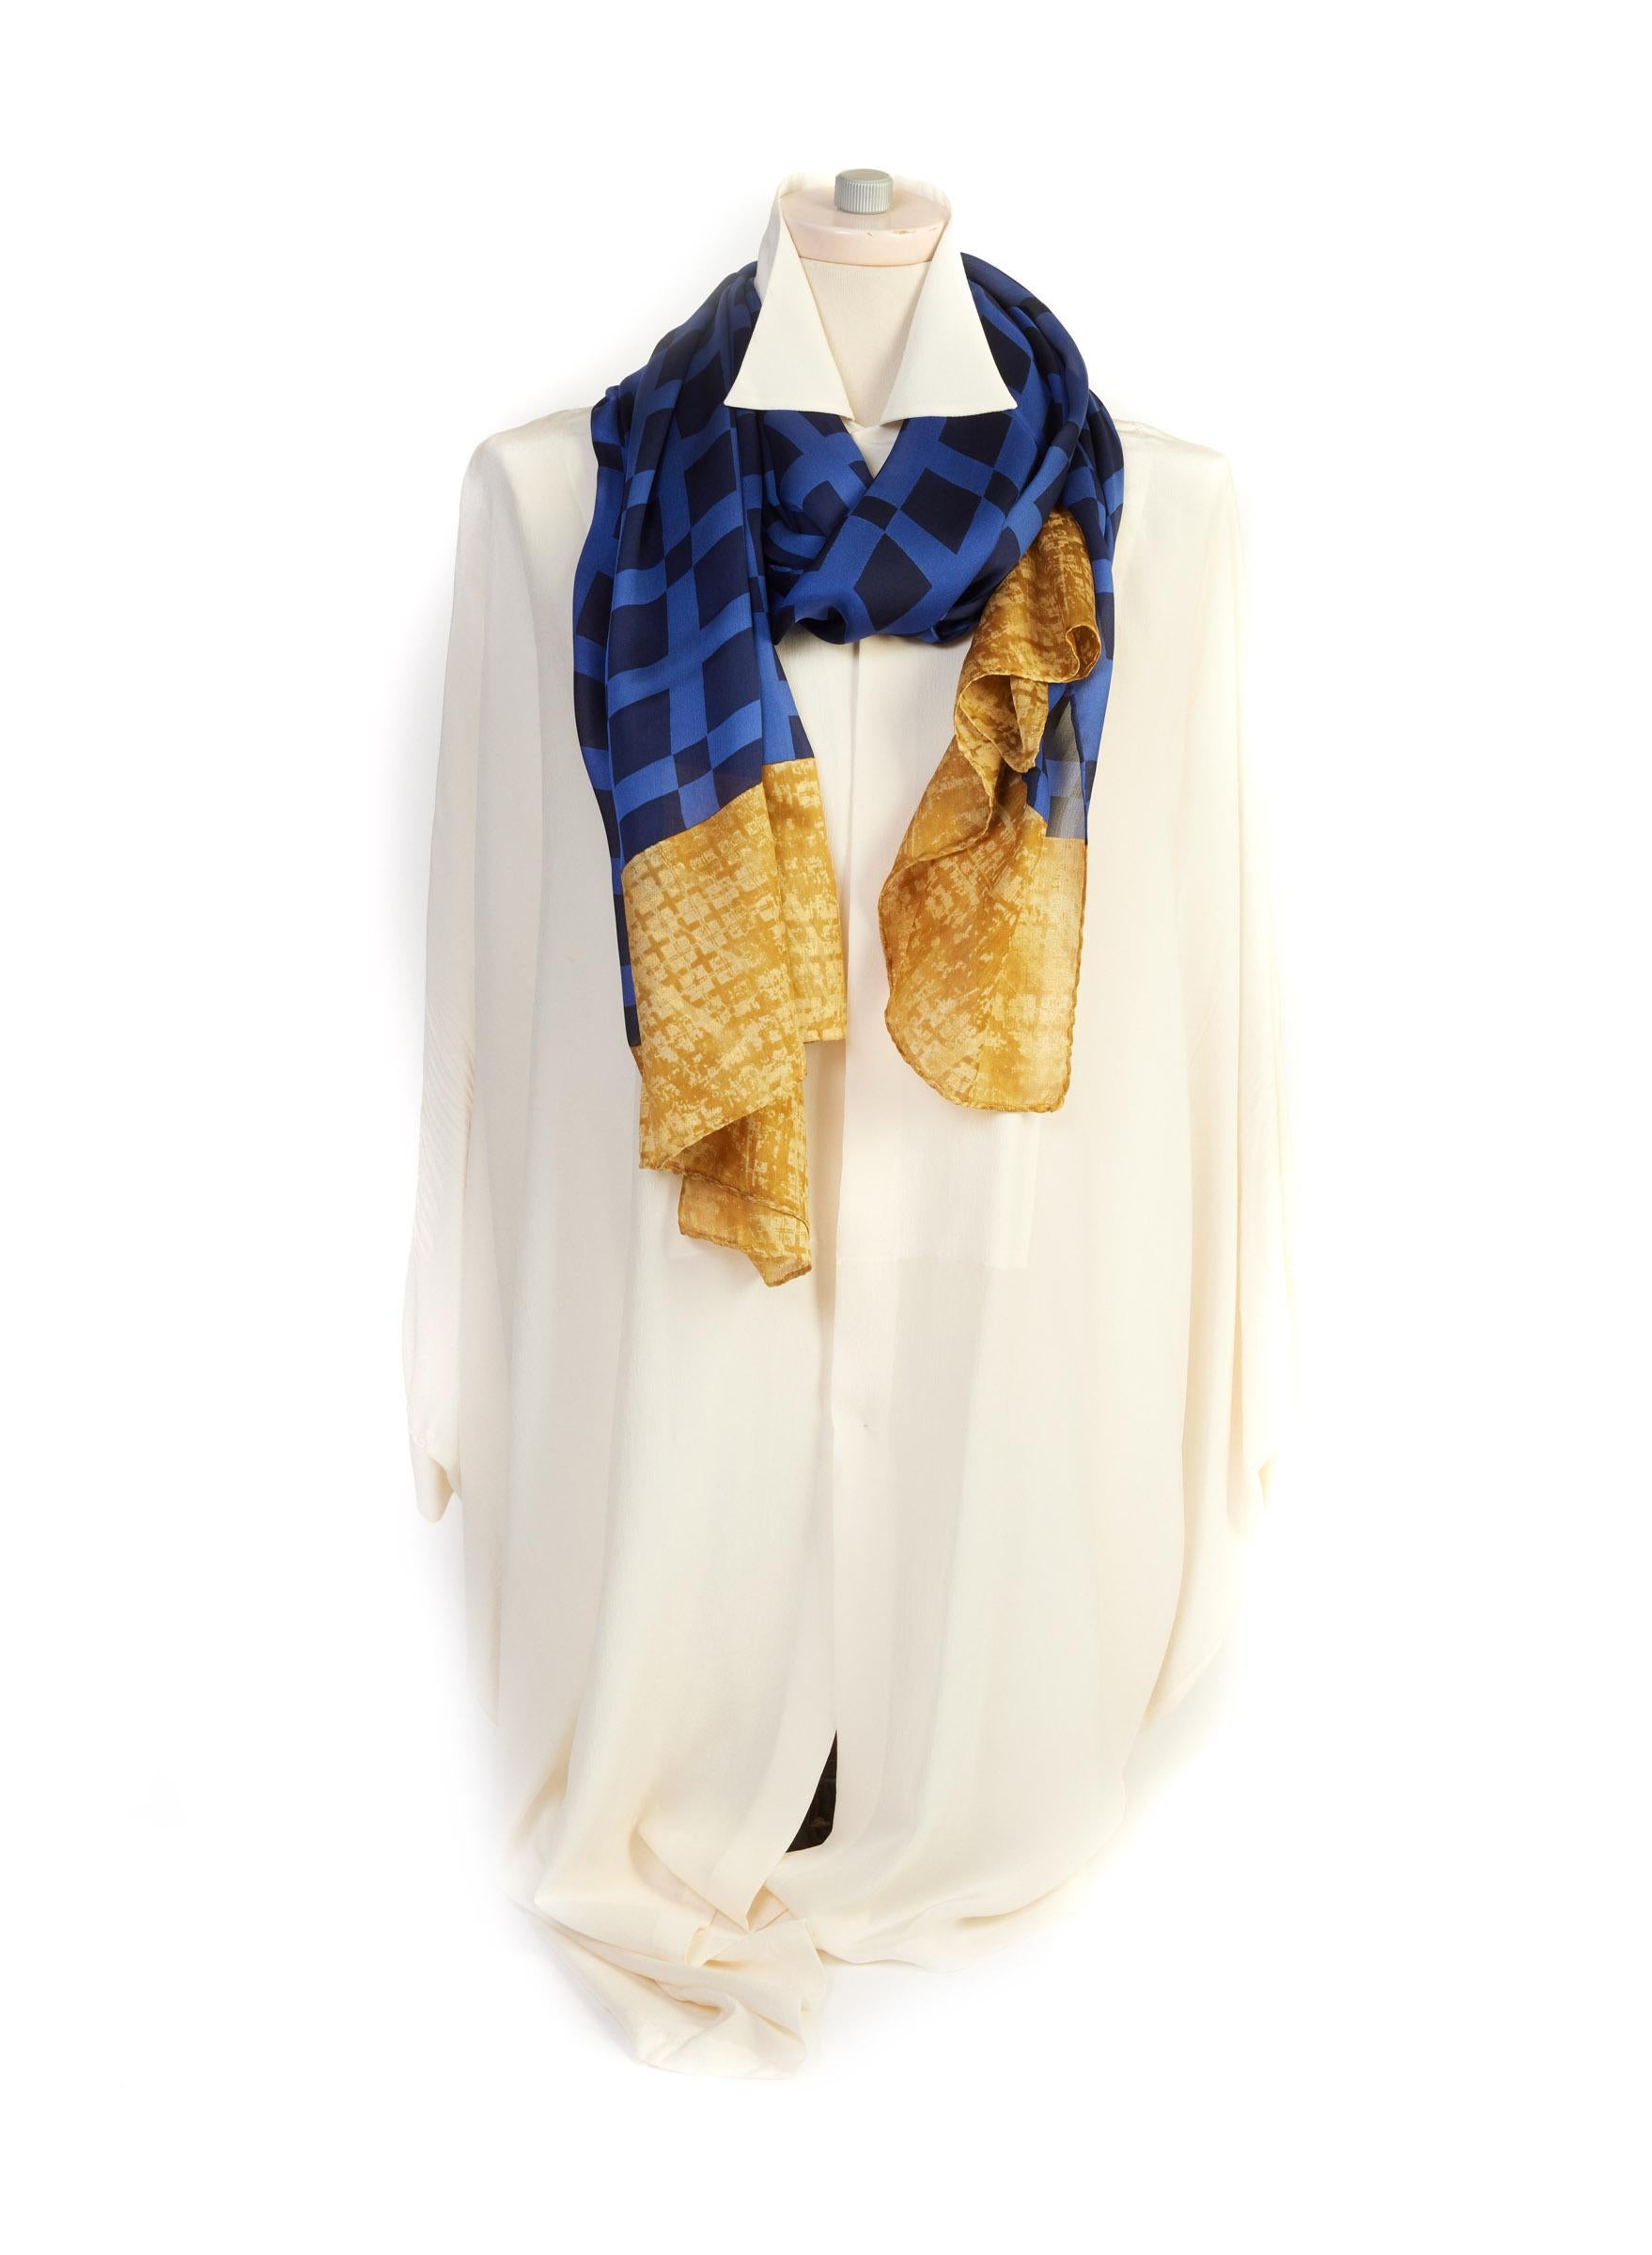 Chanel long stole with blue and gold design. Hand rolled edges.